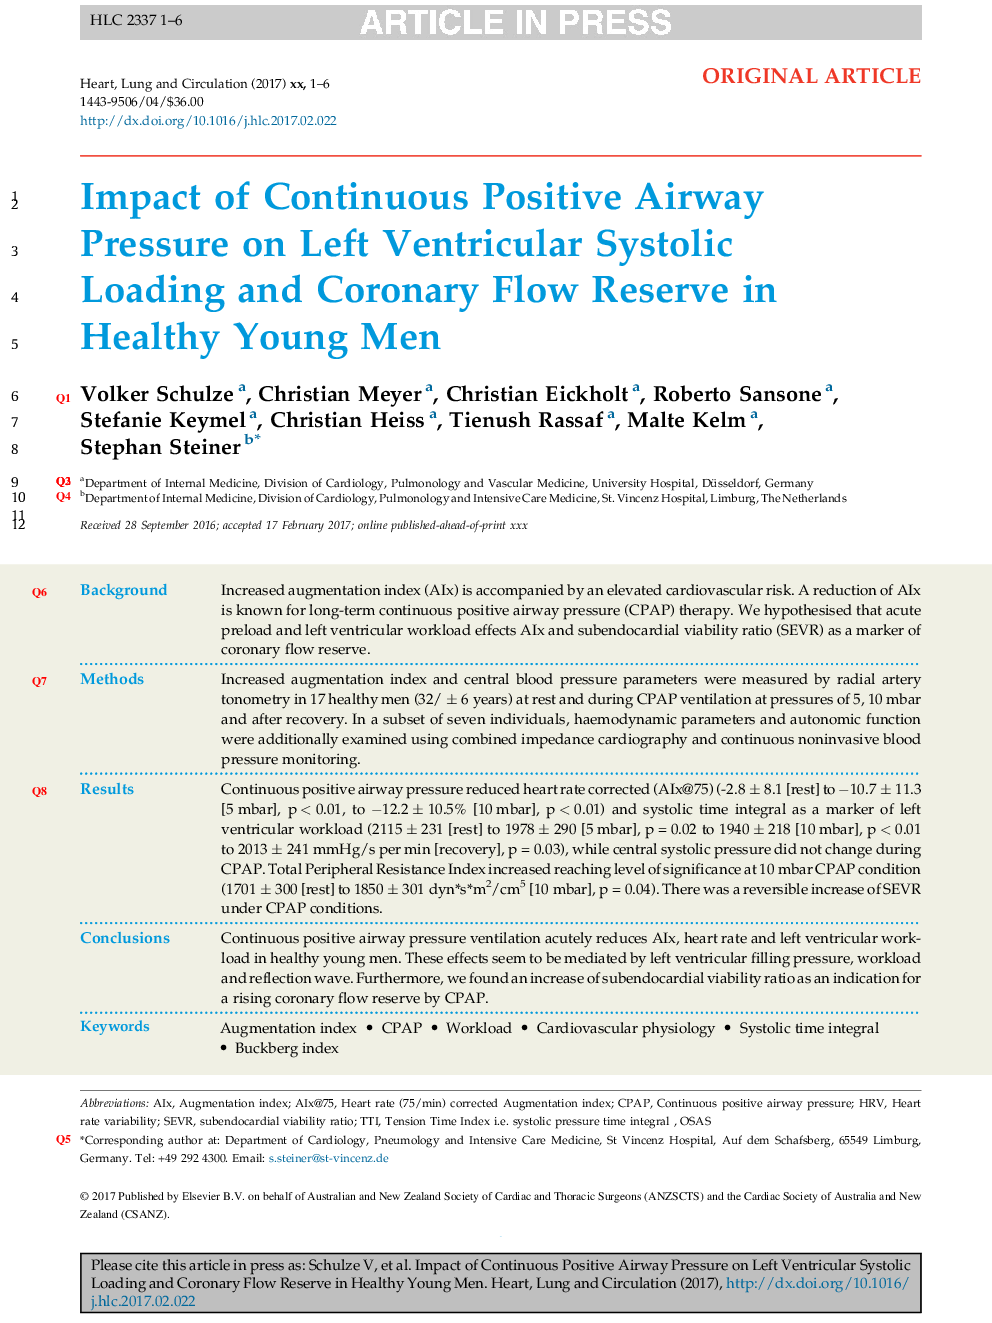 Impact of Continuous Positive Airway Pressure on Left Ventricular Systolic Loading and Coronary Flow Reserve in Healthy Young Men